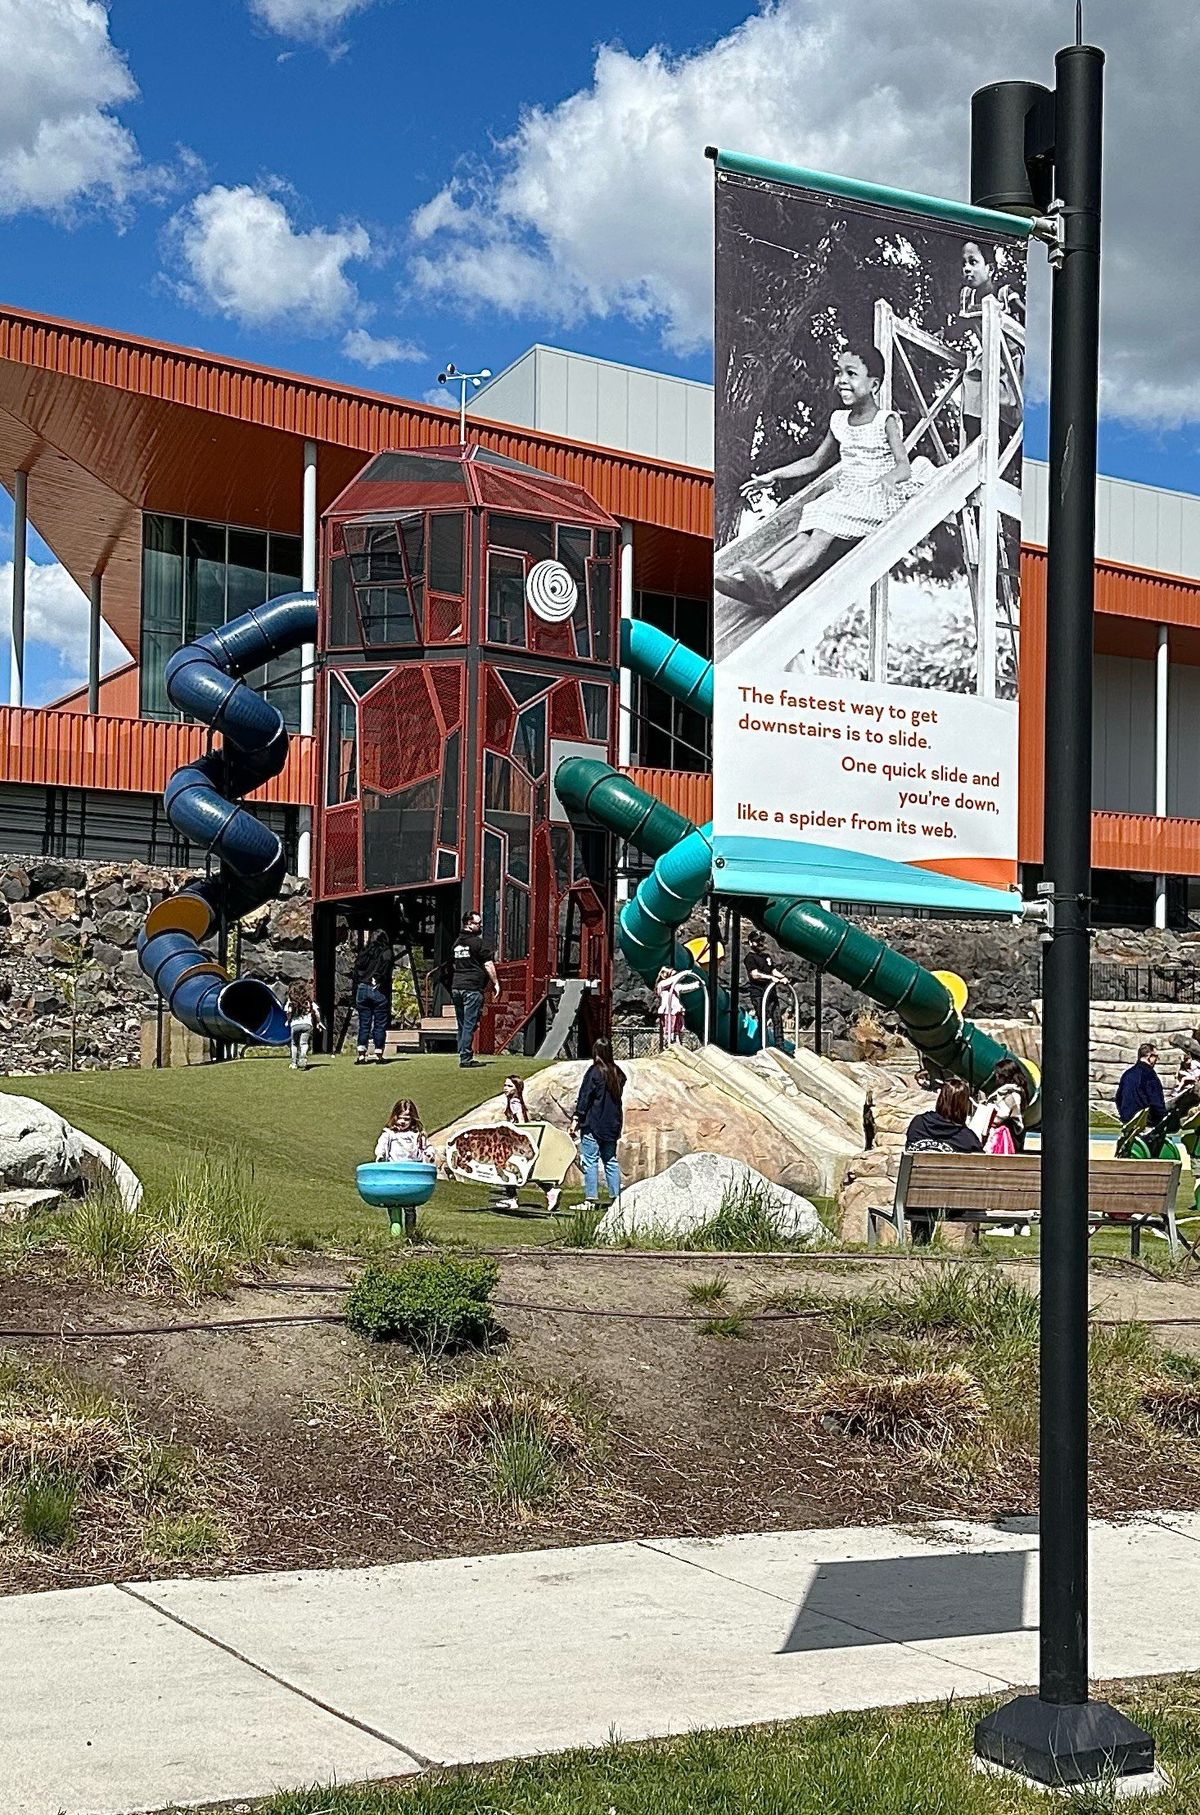 “Playtime: Then and Now” will be on display through May 30 at the Ice Age Floods Playground in Riverfront Park.  (Courtesy of Cynthia Reugh)